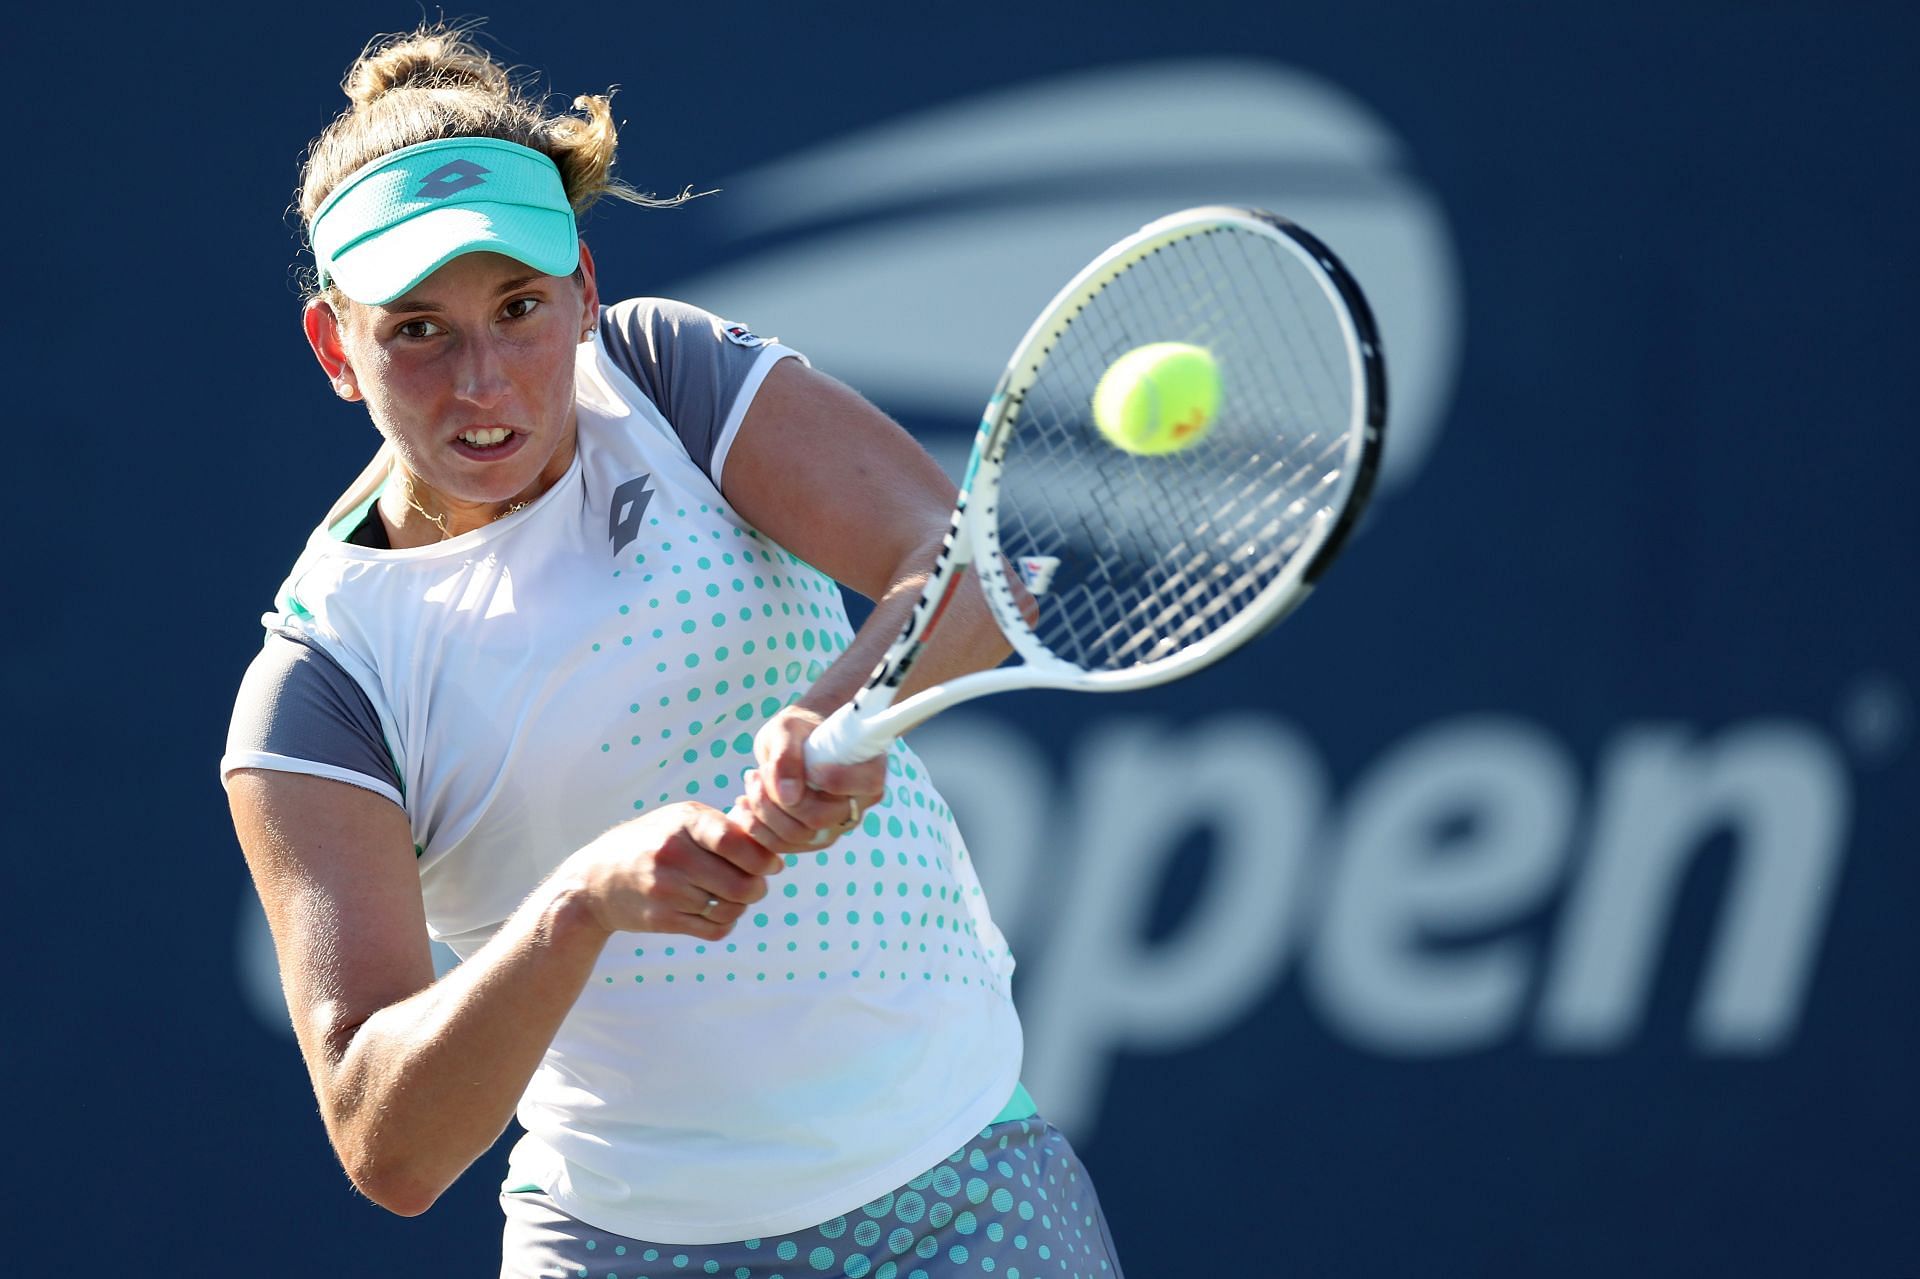 Elise Mertens bit the dust in the first round at the US Open on Tuesday.